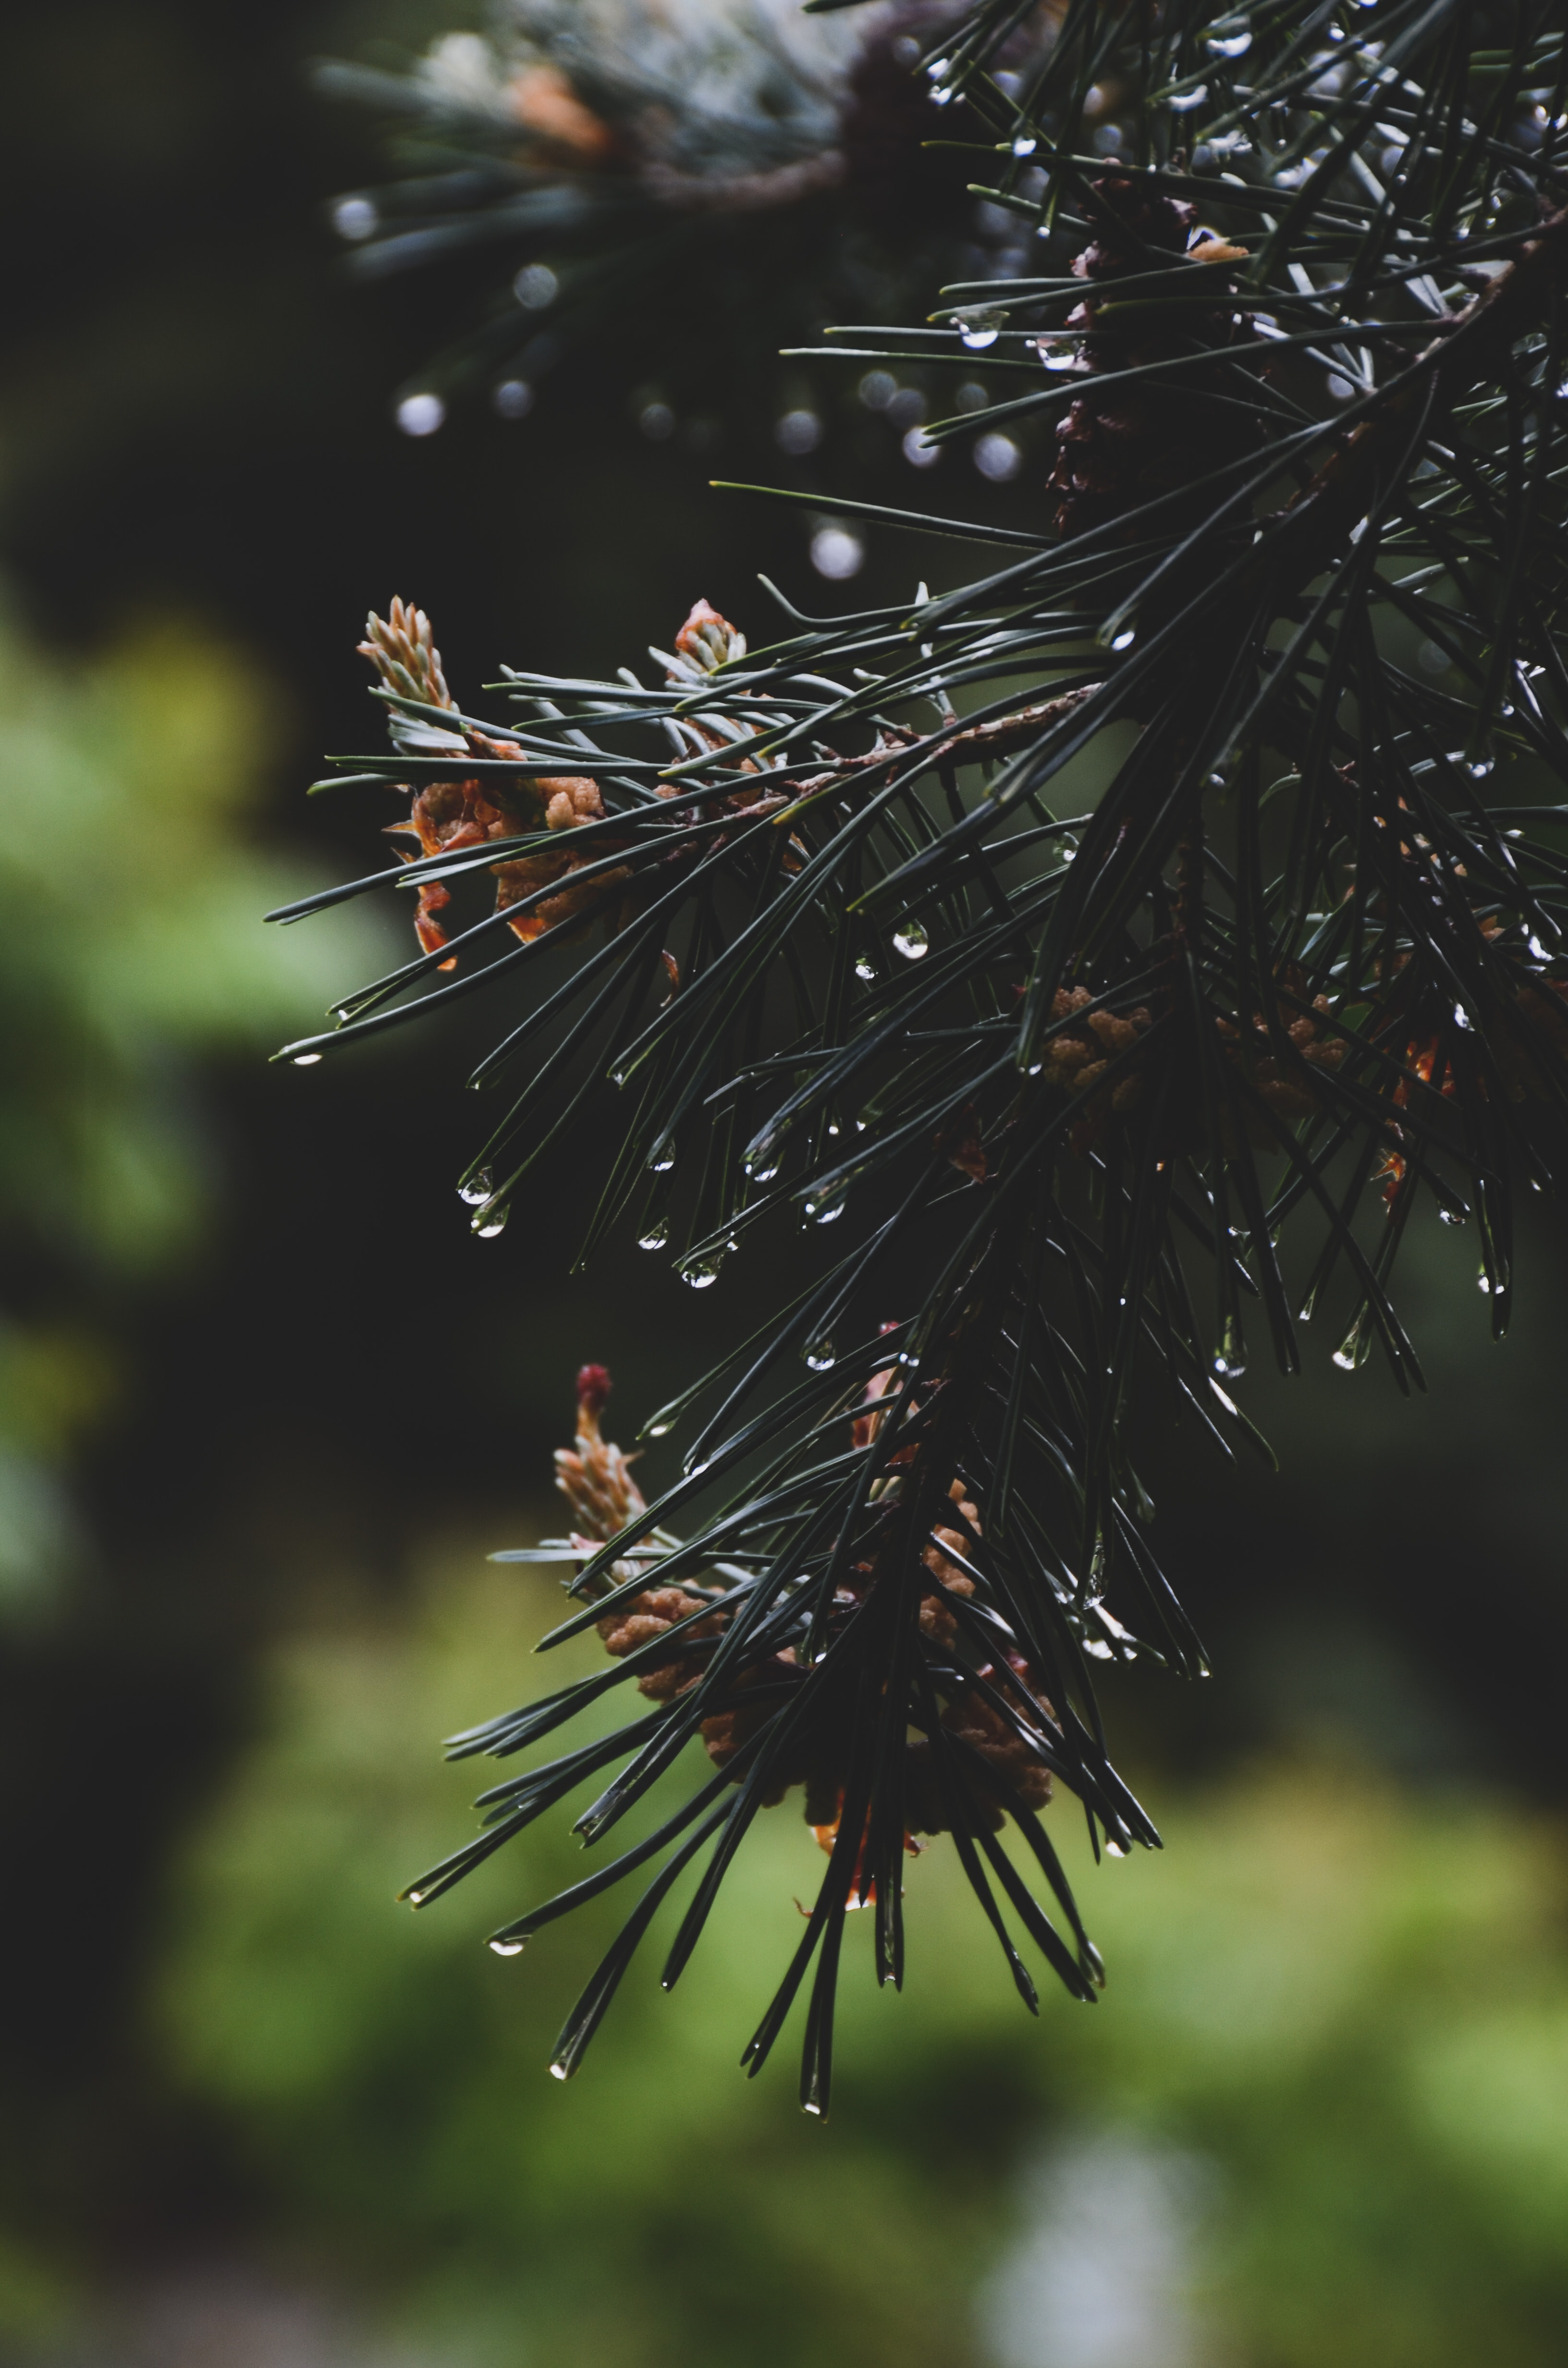 spruce, drops, nature, branch collection of HD images